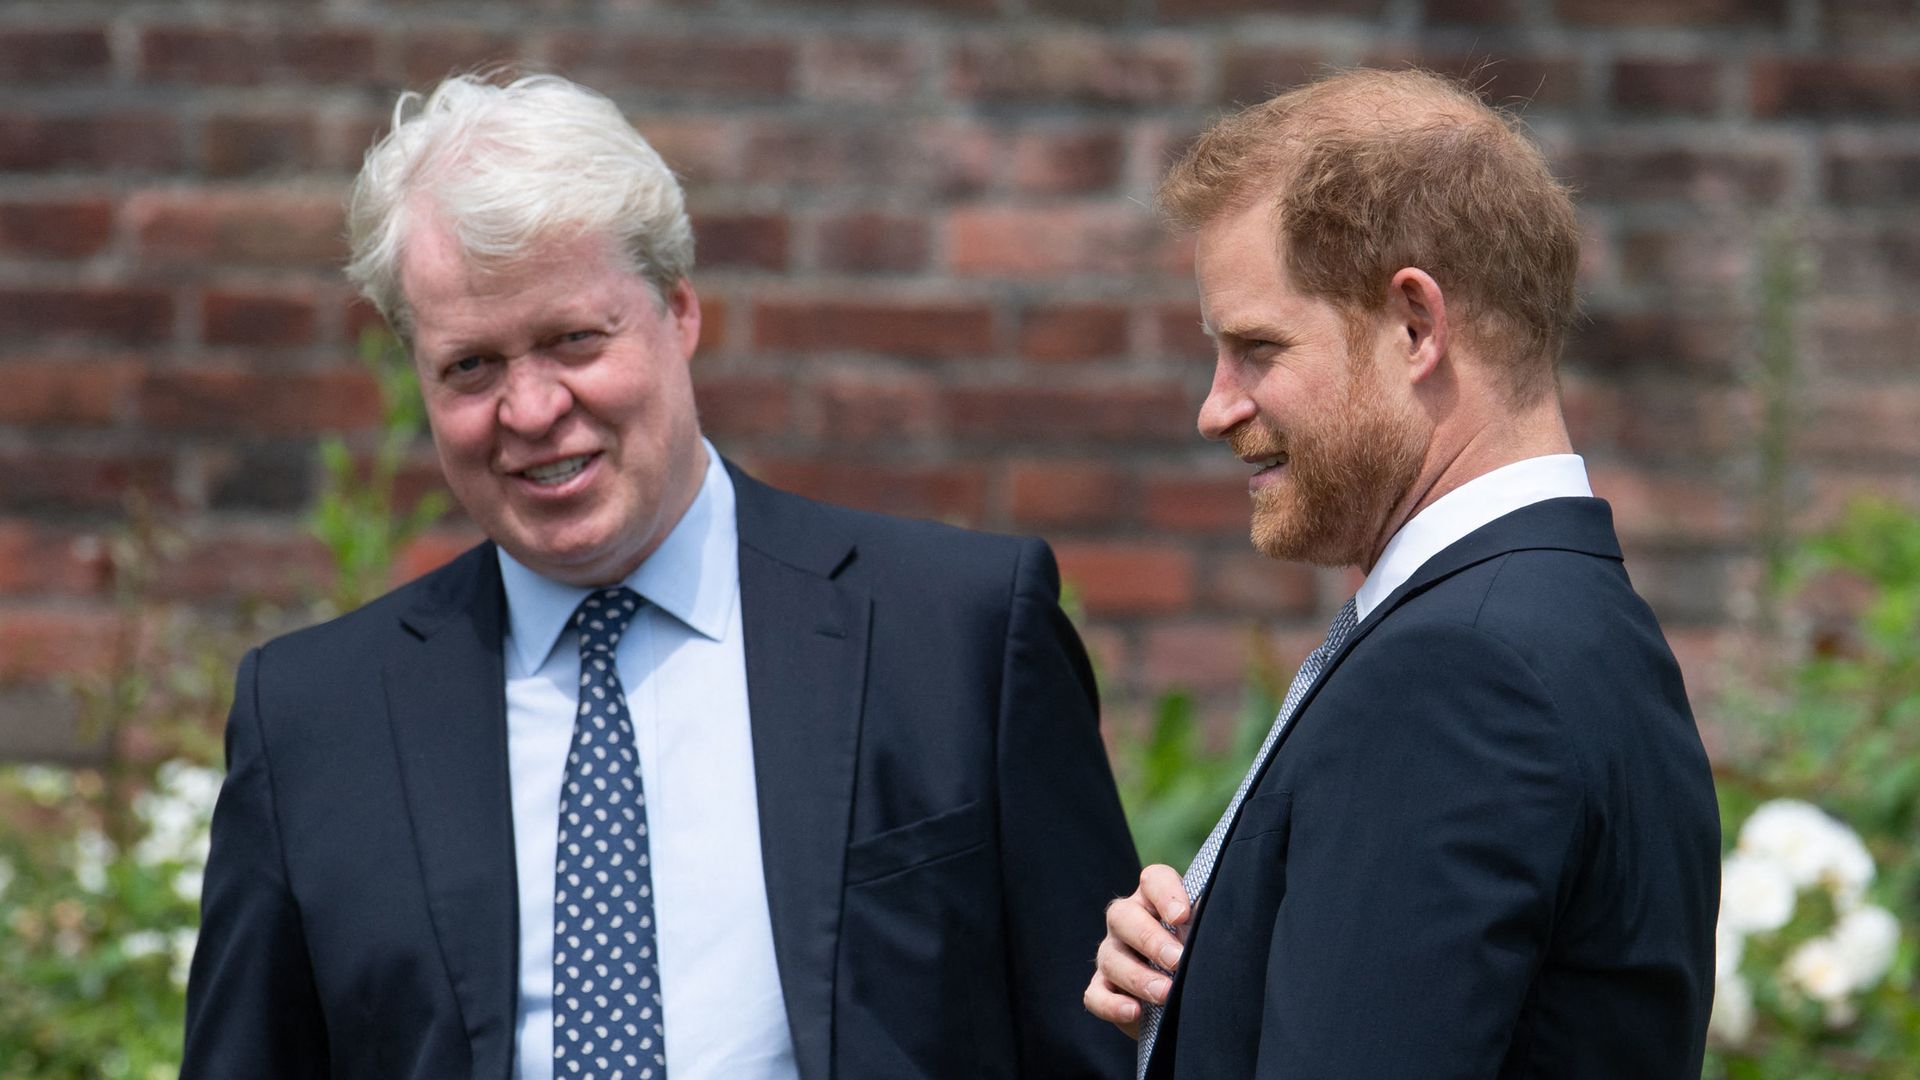 Prince Harry takes after uncle Charles Spencer in the sweetest way